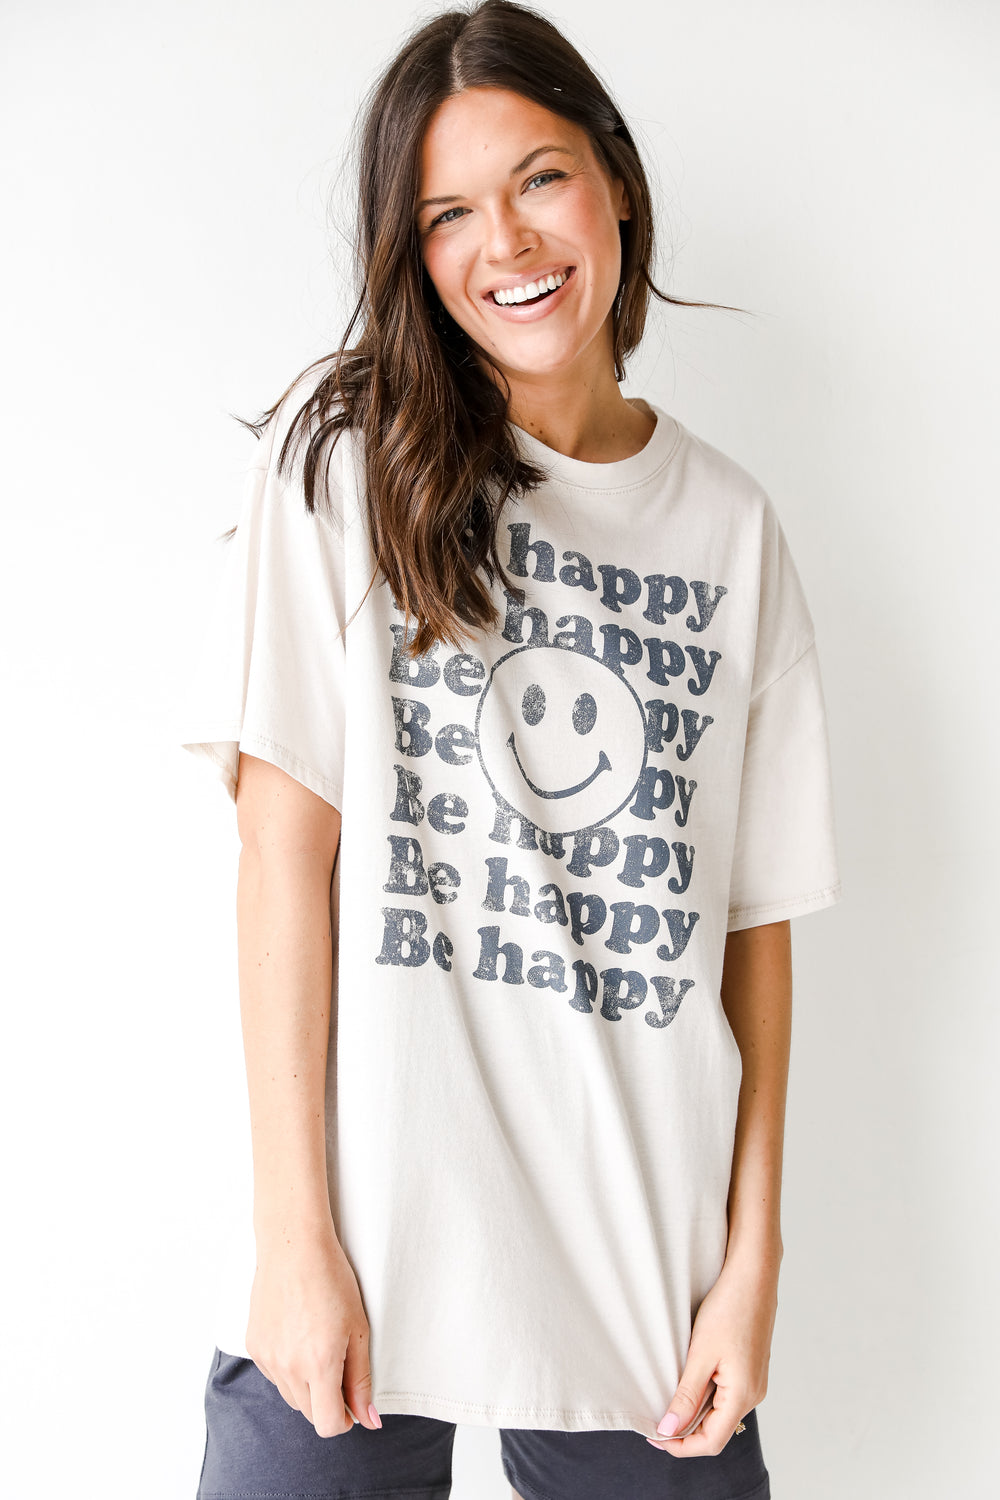 Be Happy Smiley Face Graphic Tee from dress up